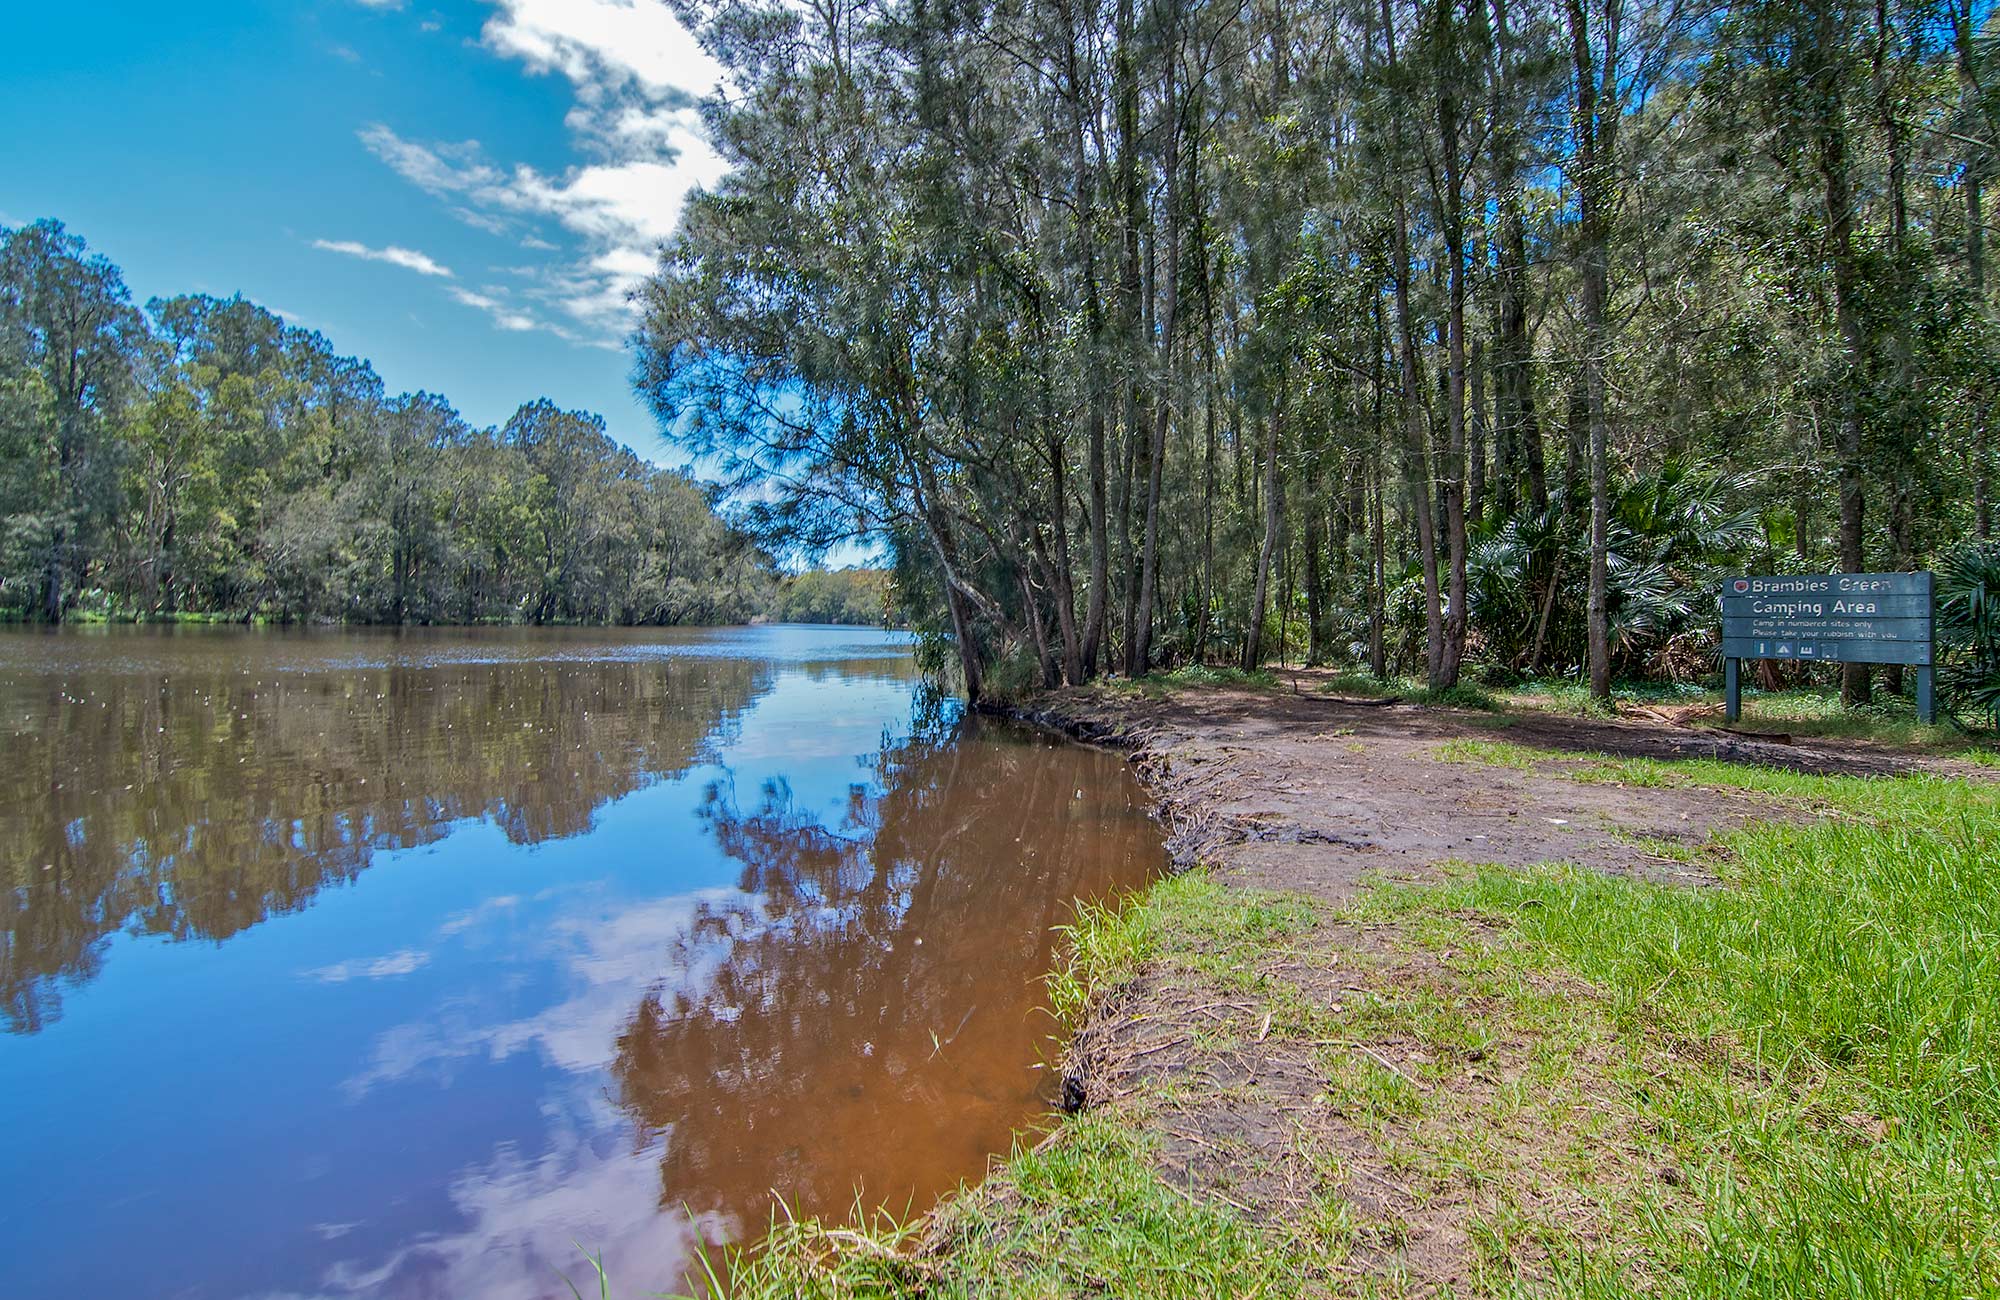 Brambles Green Campground, Myall Lakes National Park. Photo: John Spencer/DPIE